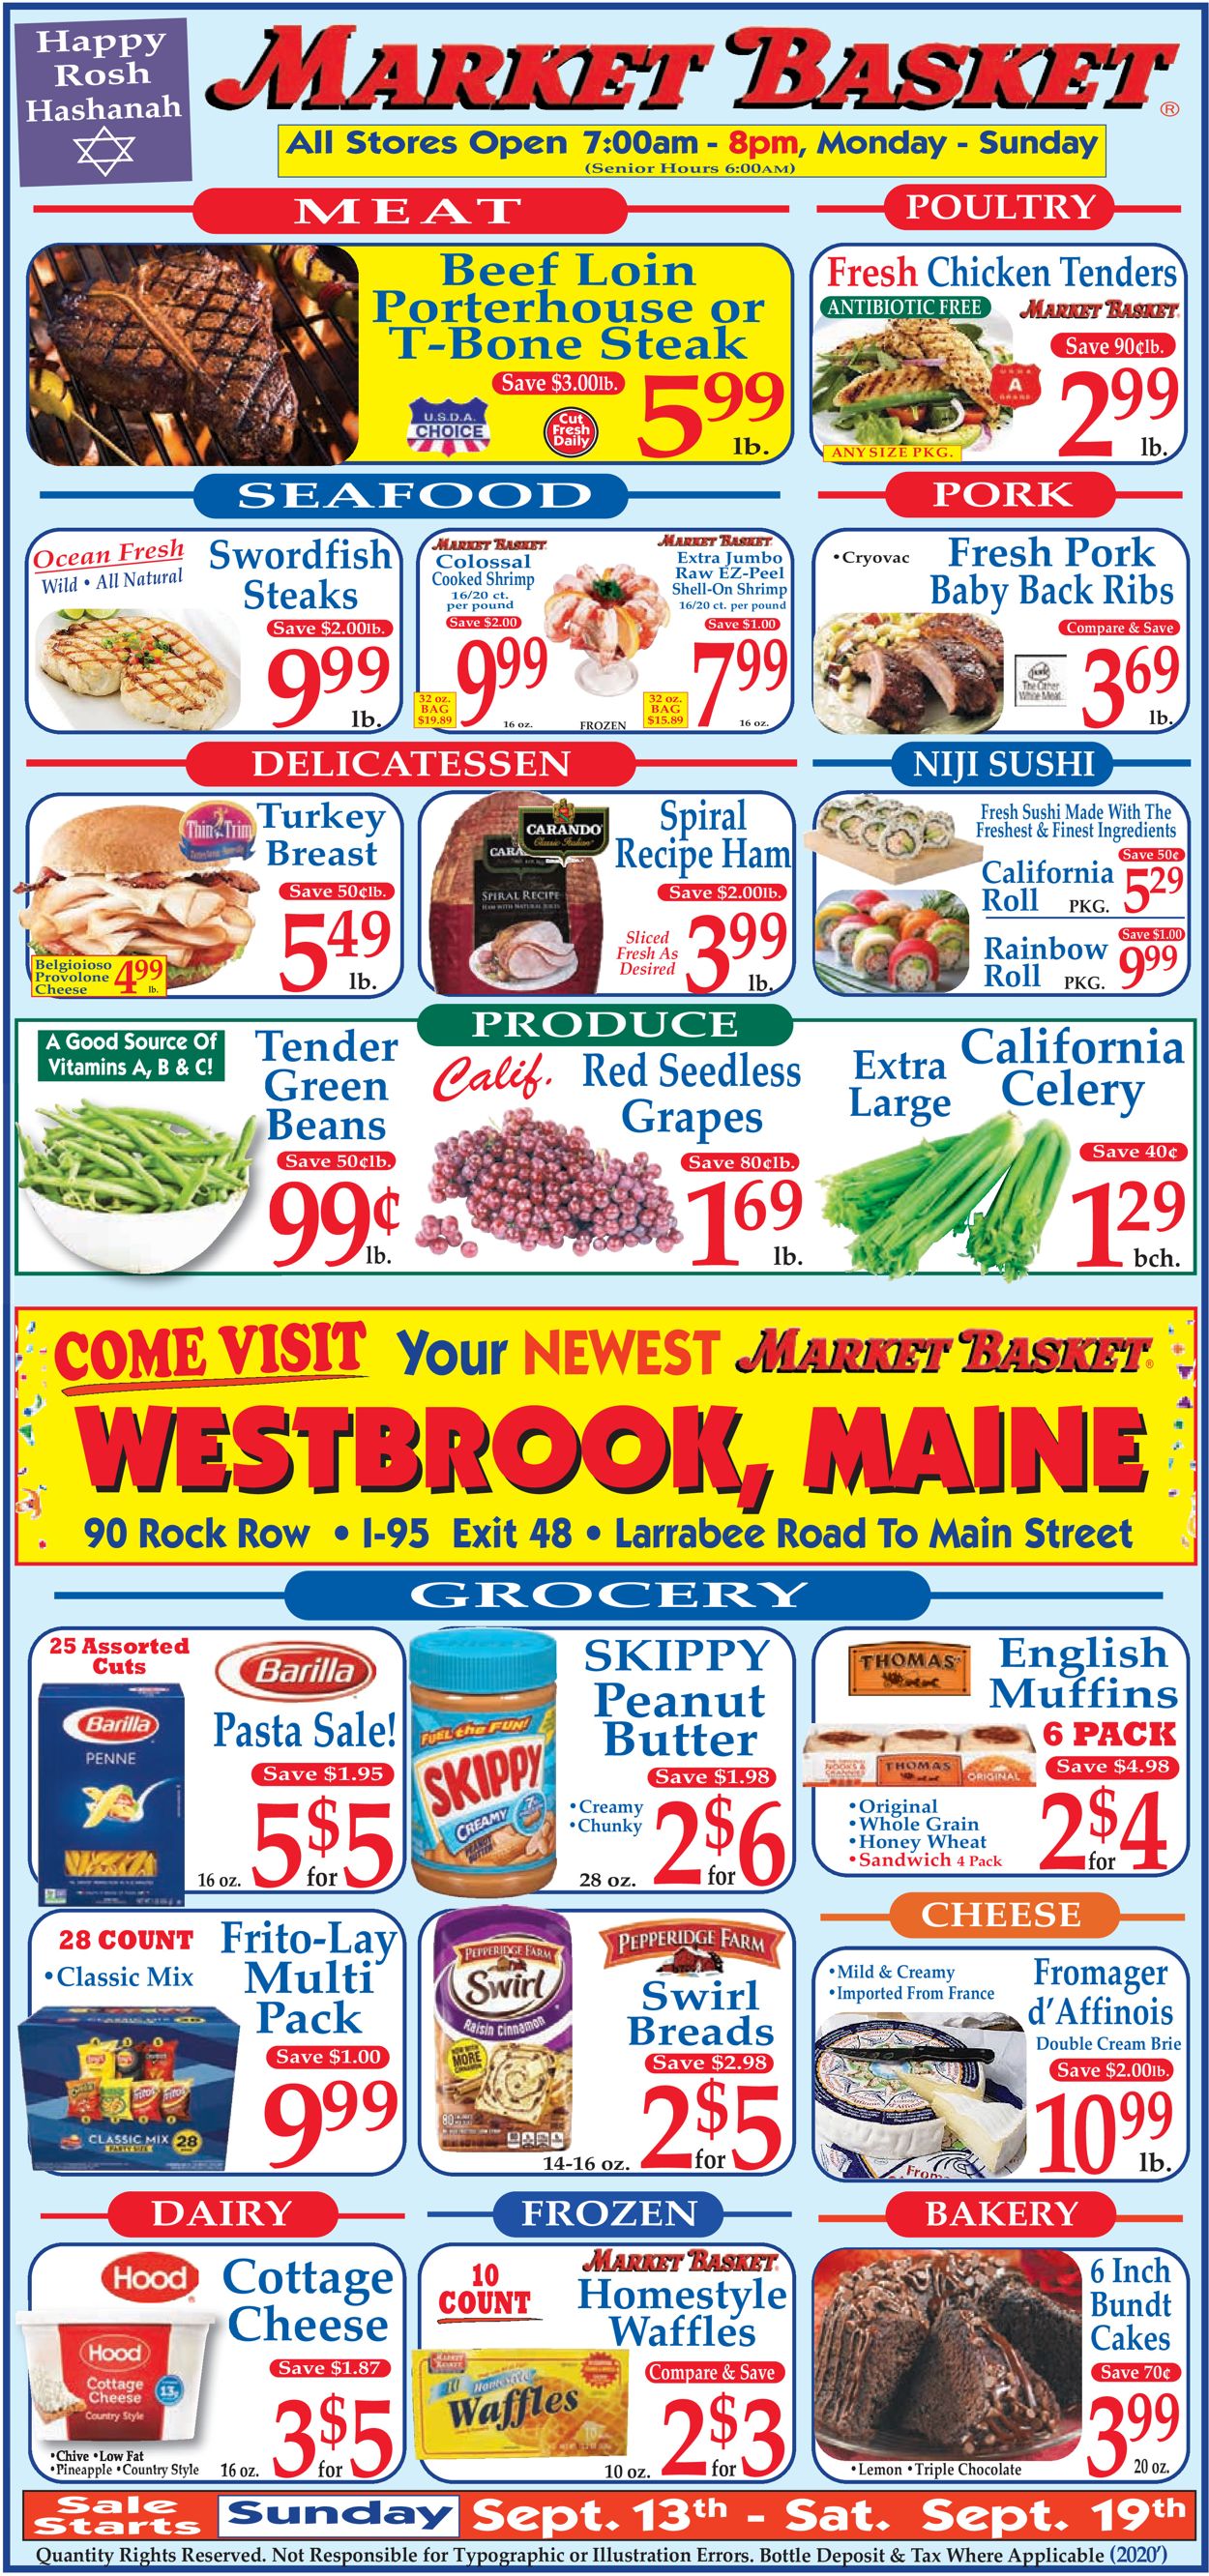 Market Basket Current weekly ad 09/13 - 09/19/2020 - frequent-ads.com